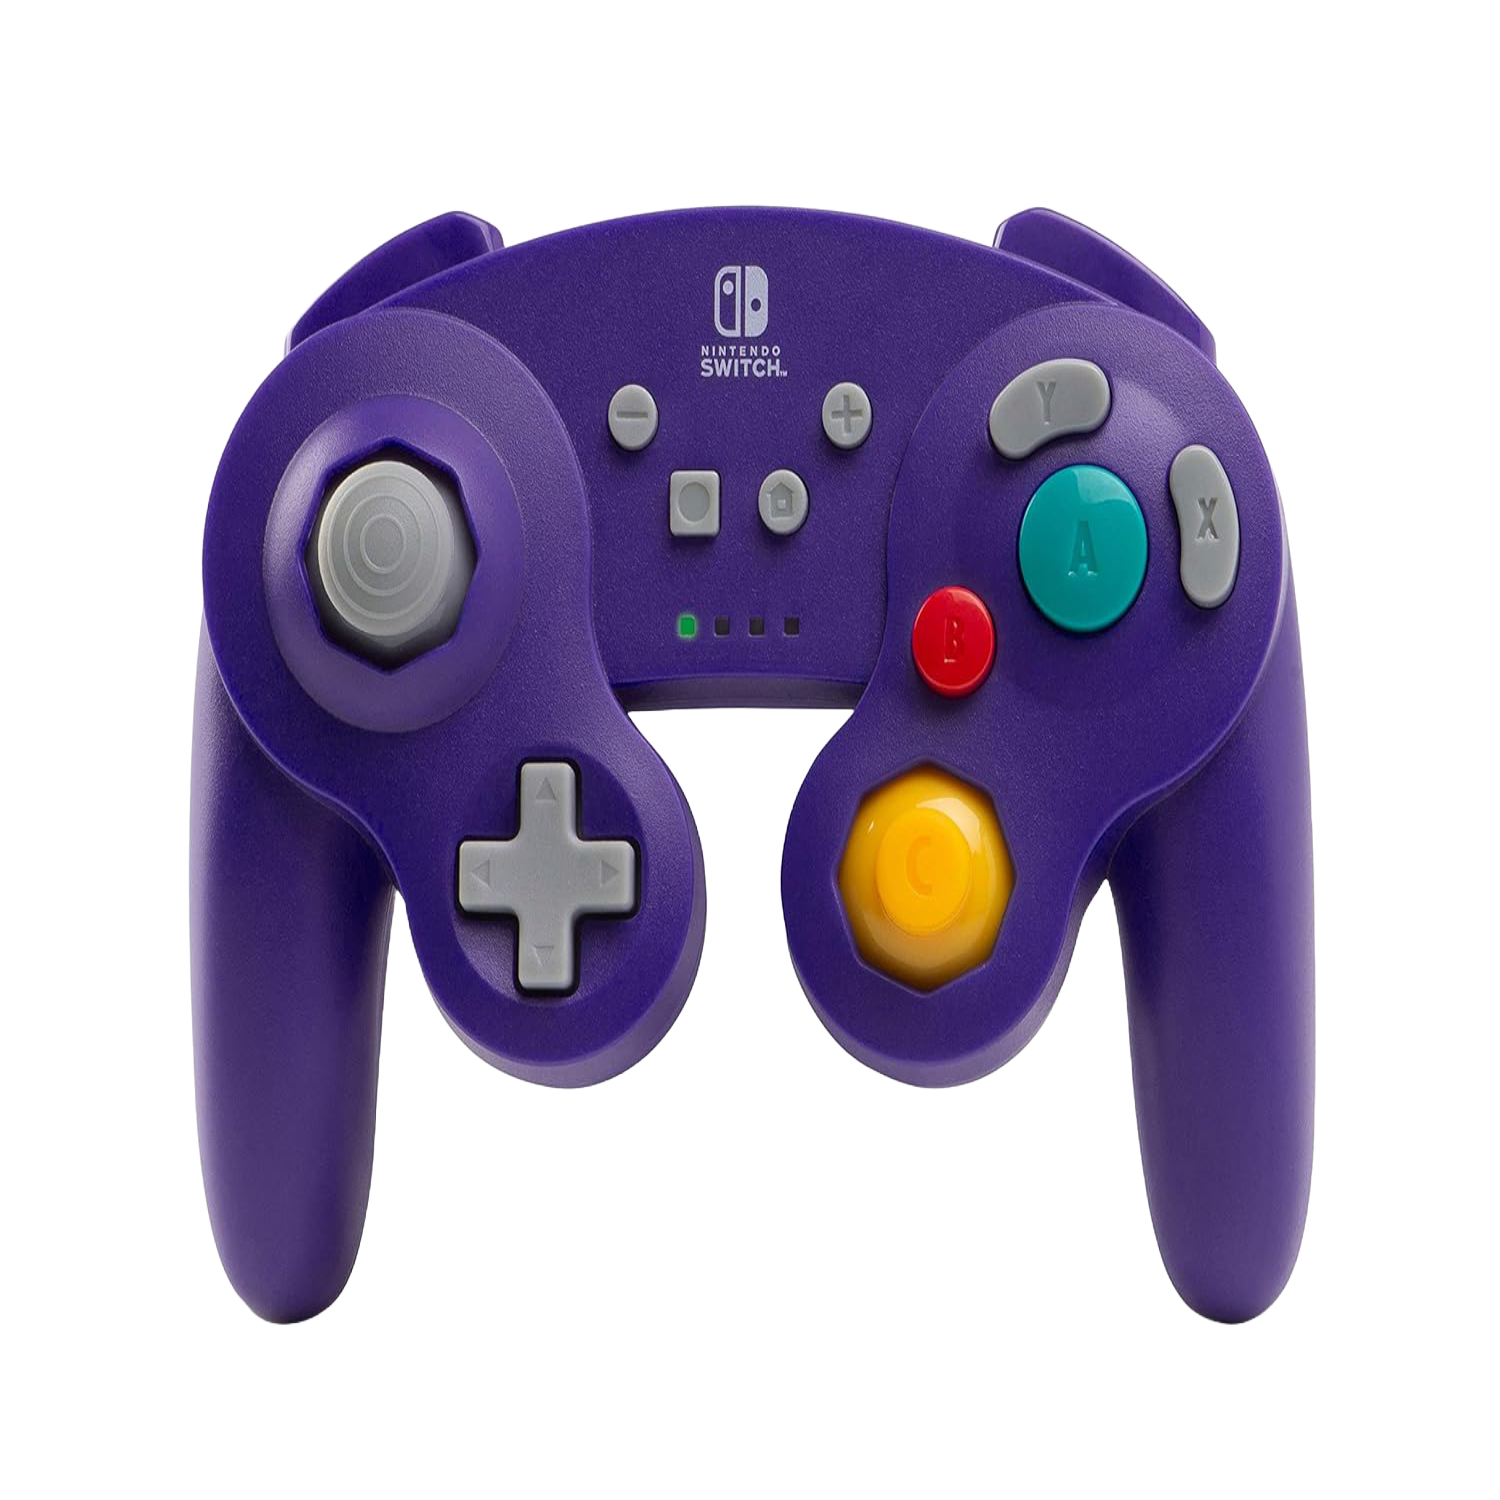 A PNG render of the PowerA Wireless Gamecube Controller in purple on a transparent background.